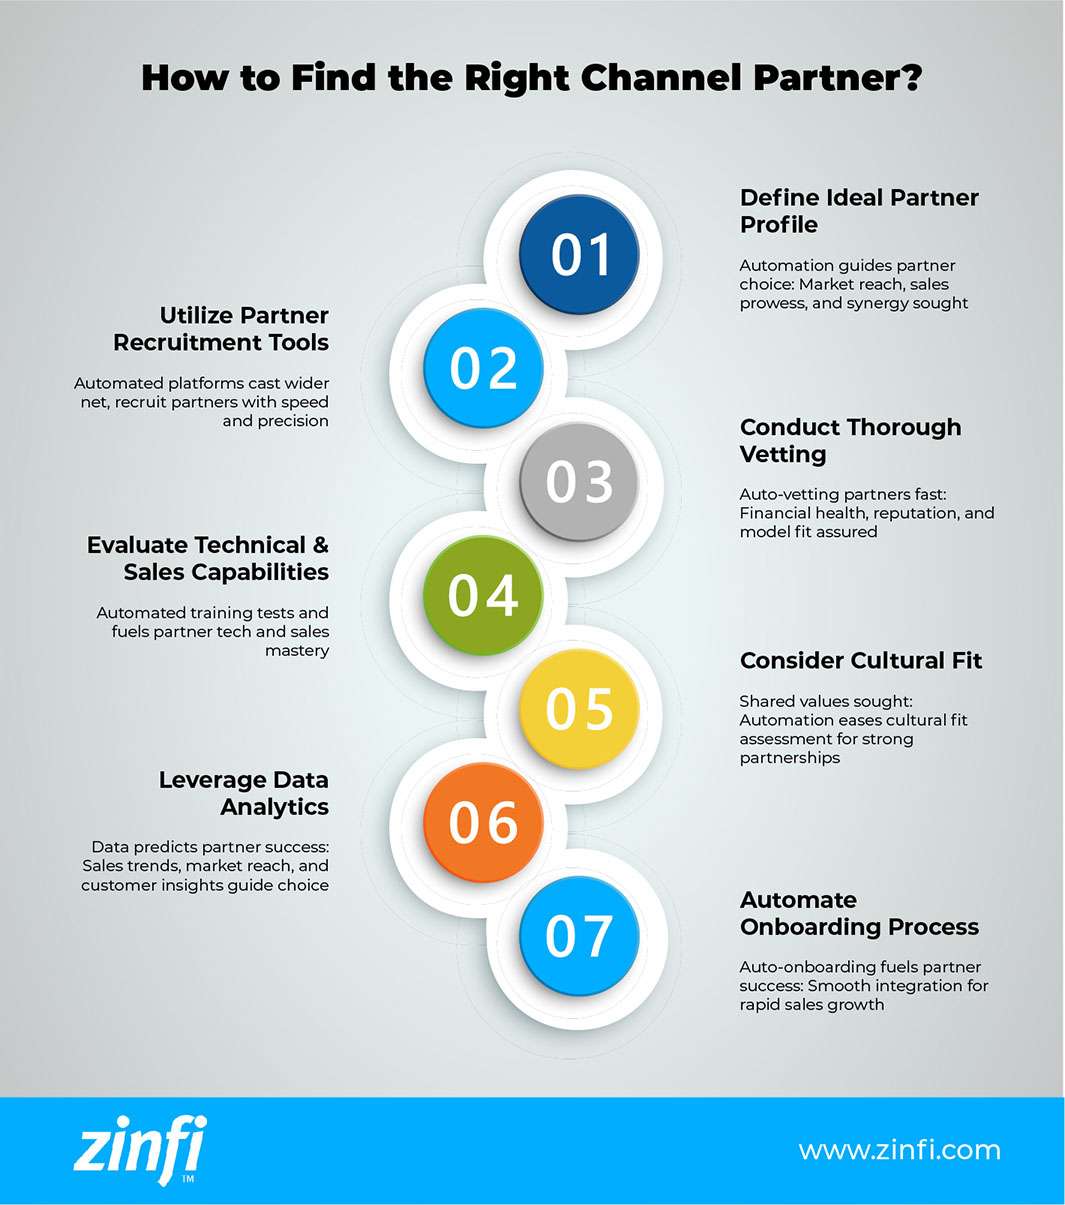 Infographic on how to find the right Channel Partner